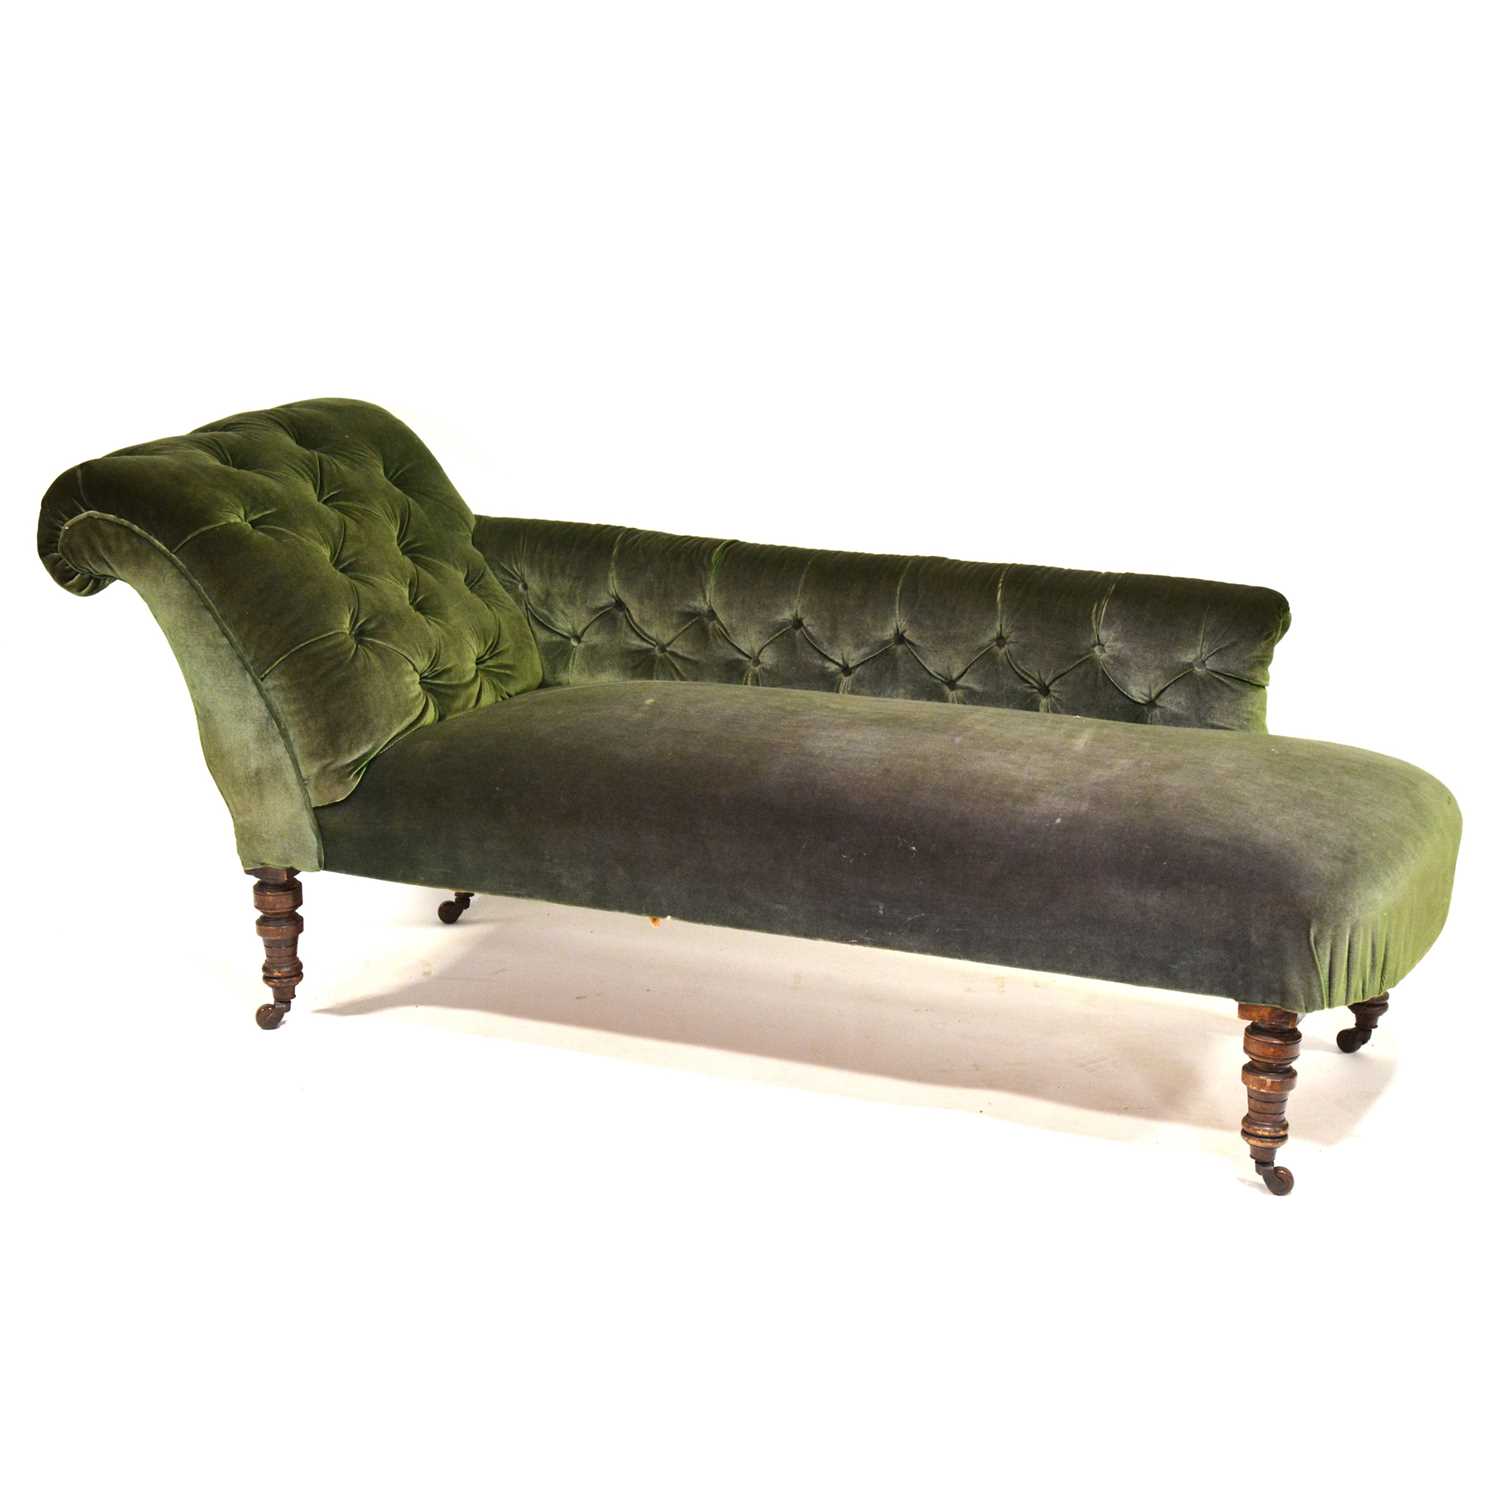 Victorian chaise lounge